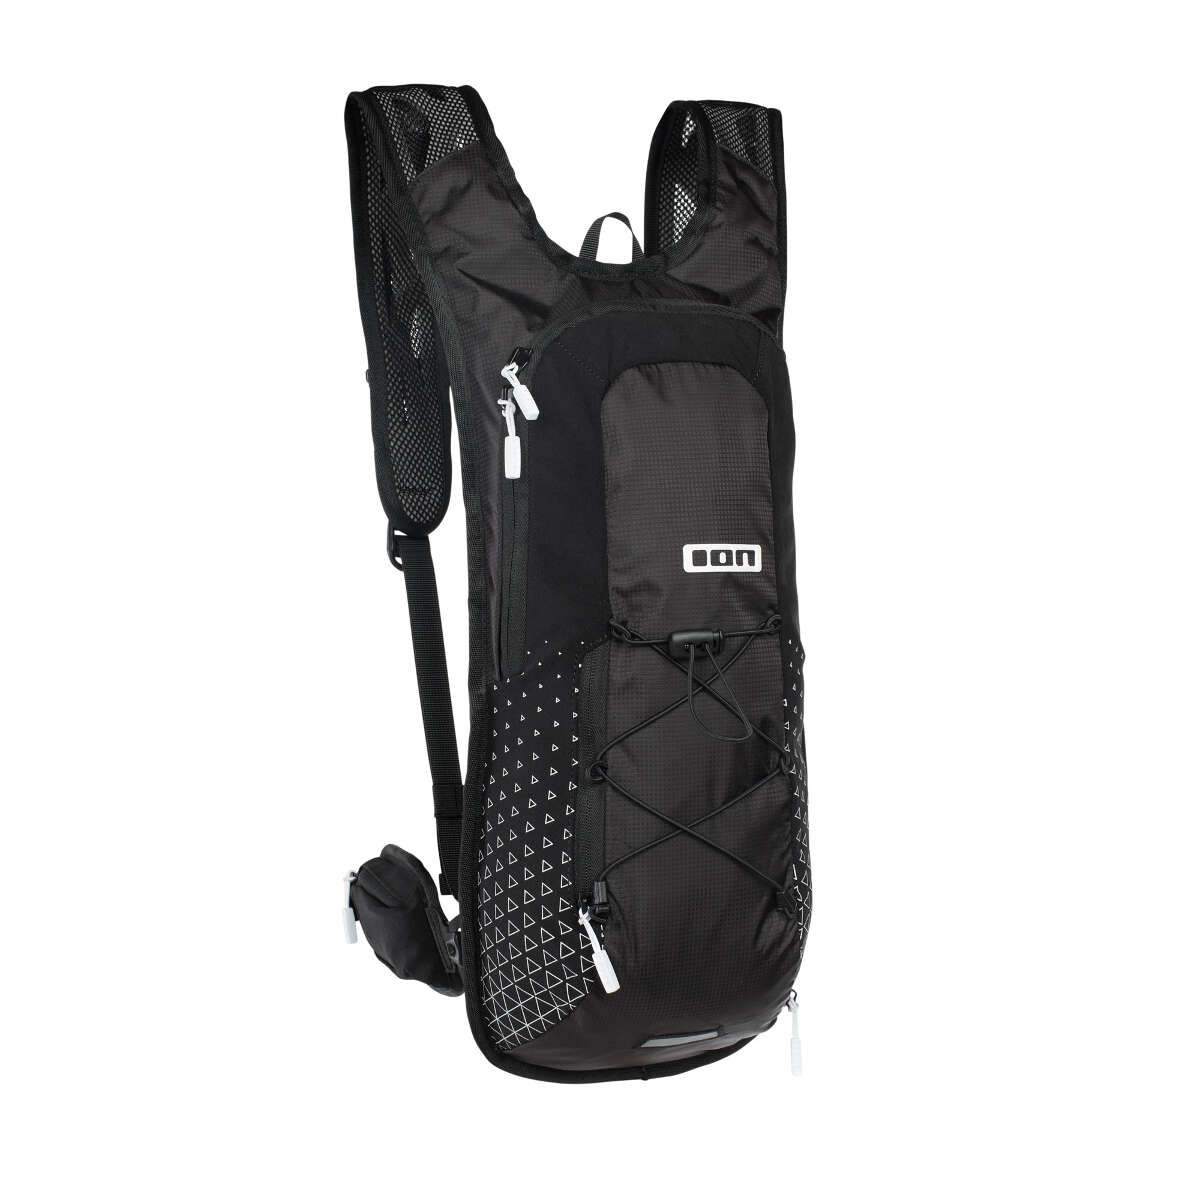 ION Backpack with Hydration System Villain 4 Black - 4 L